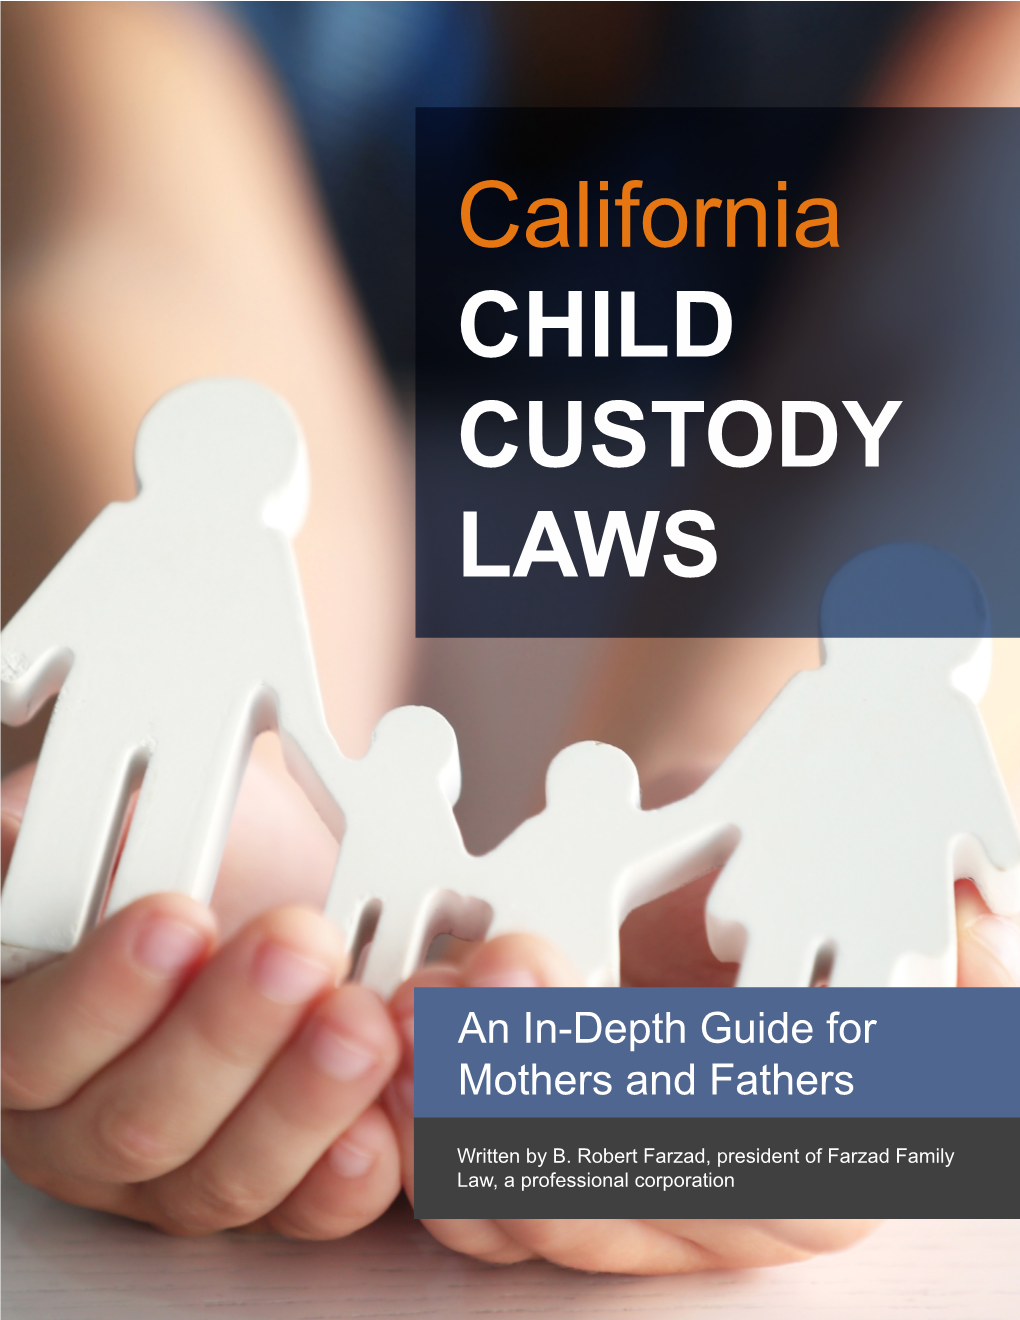 CALIFORNIA CHILD CUSTODY LAWS | an In-Depth Guide for Mothers and Fathers CHAPTER | 1